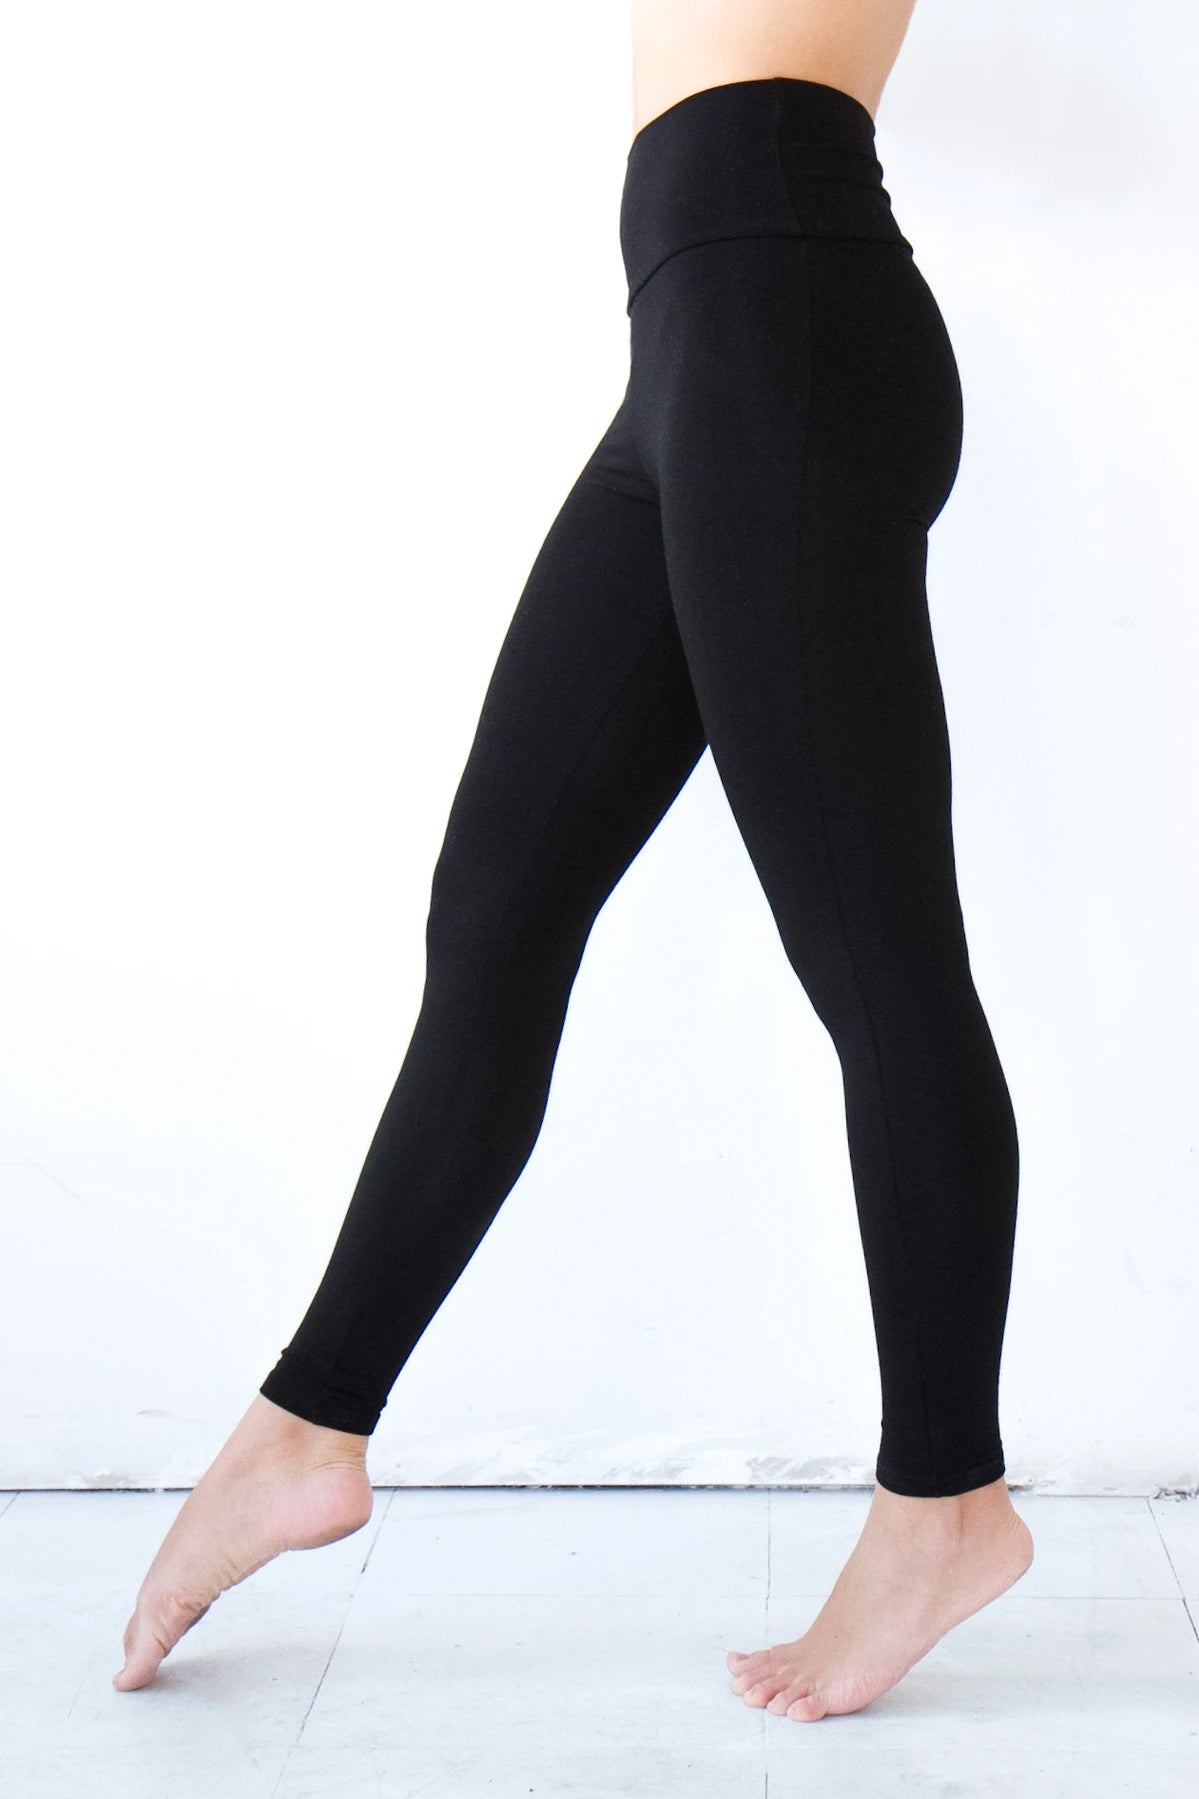 Paris Leggings by Advika, Black, high waistband, cotton, sizes XS to XXL, made in Montreal